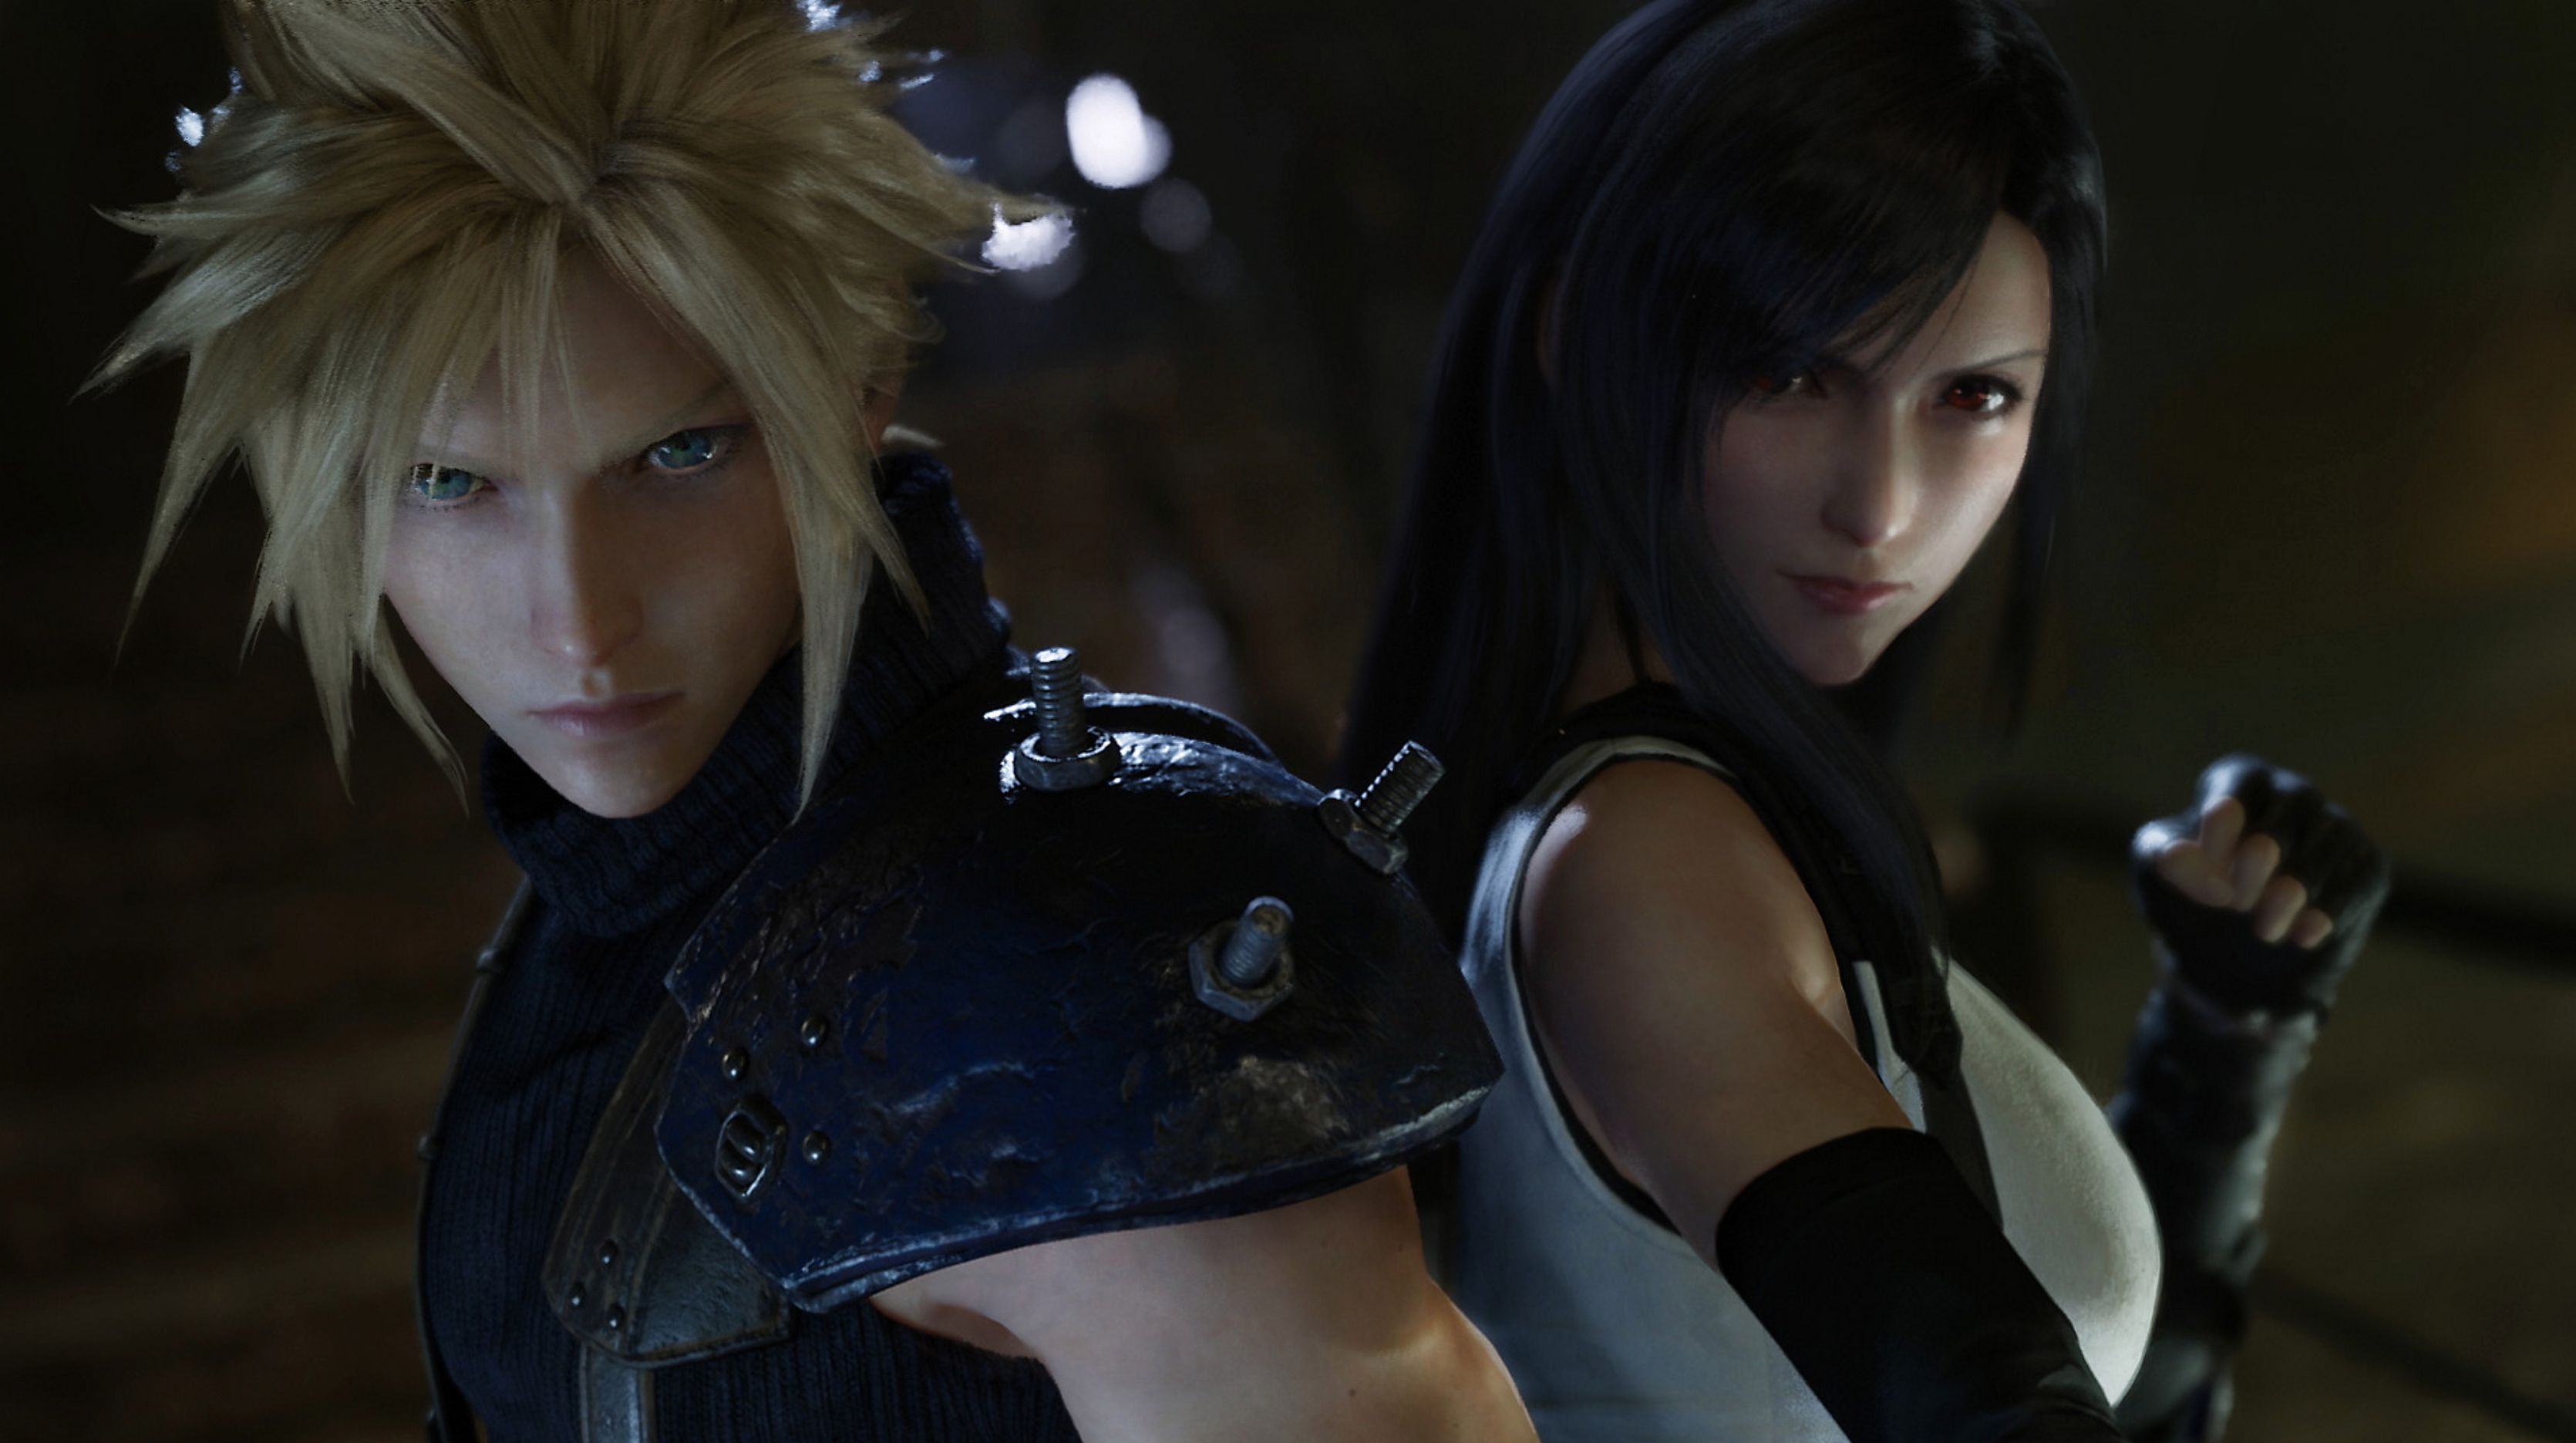 final fantasy games coming to game pass